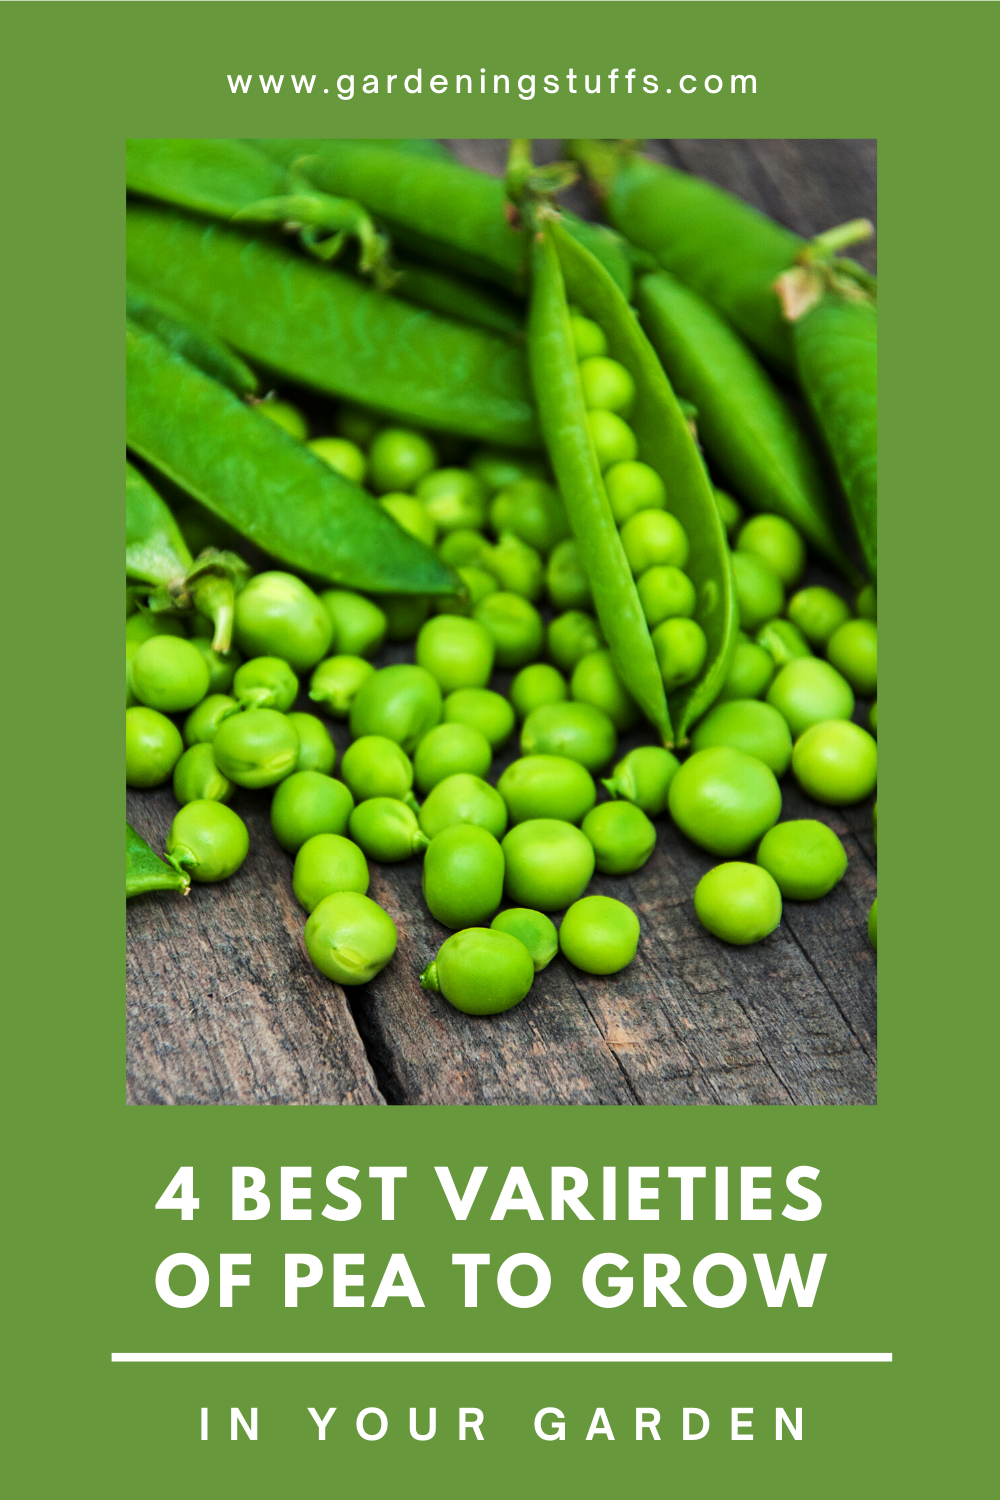 For the beginners who want to grow fresh peas to produce your own supply of salads or soups. There are a number of different options if you plan to start growing peas in your garden. Read on to know the best varieties of peas that are good for beginners due to their ease of care.